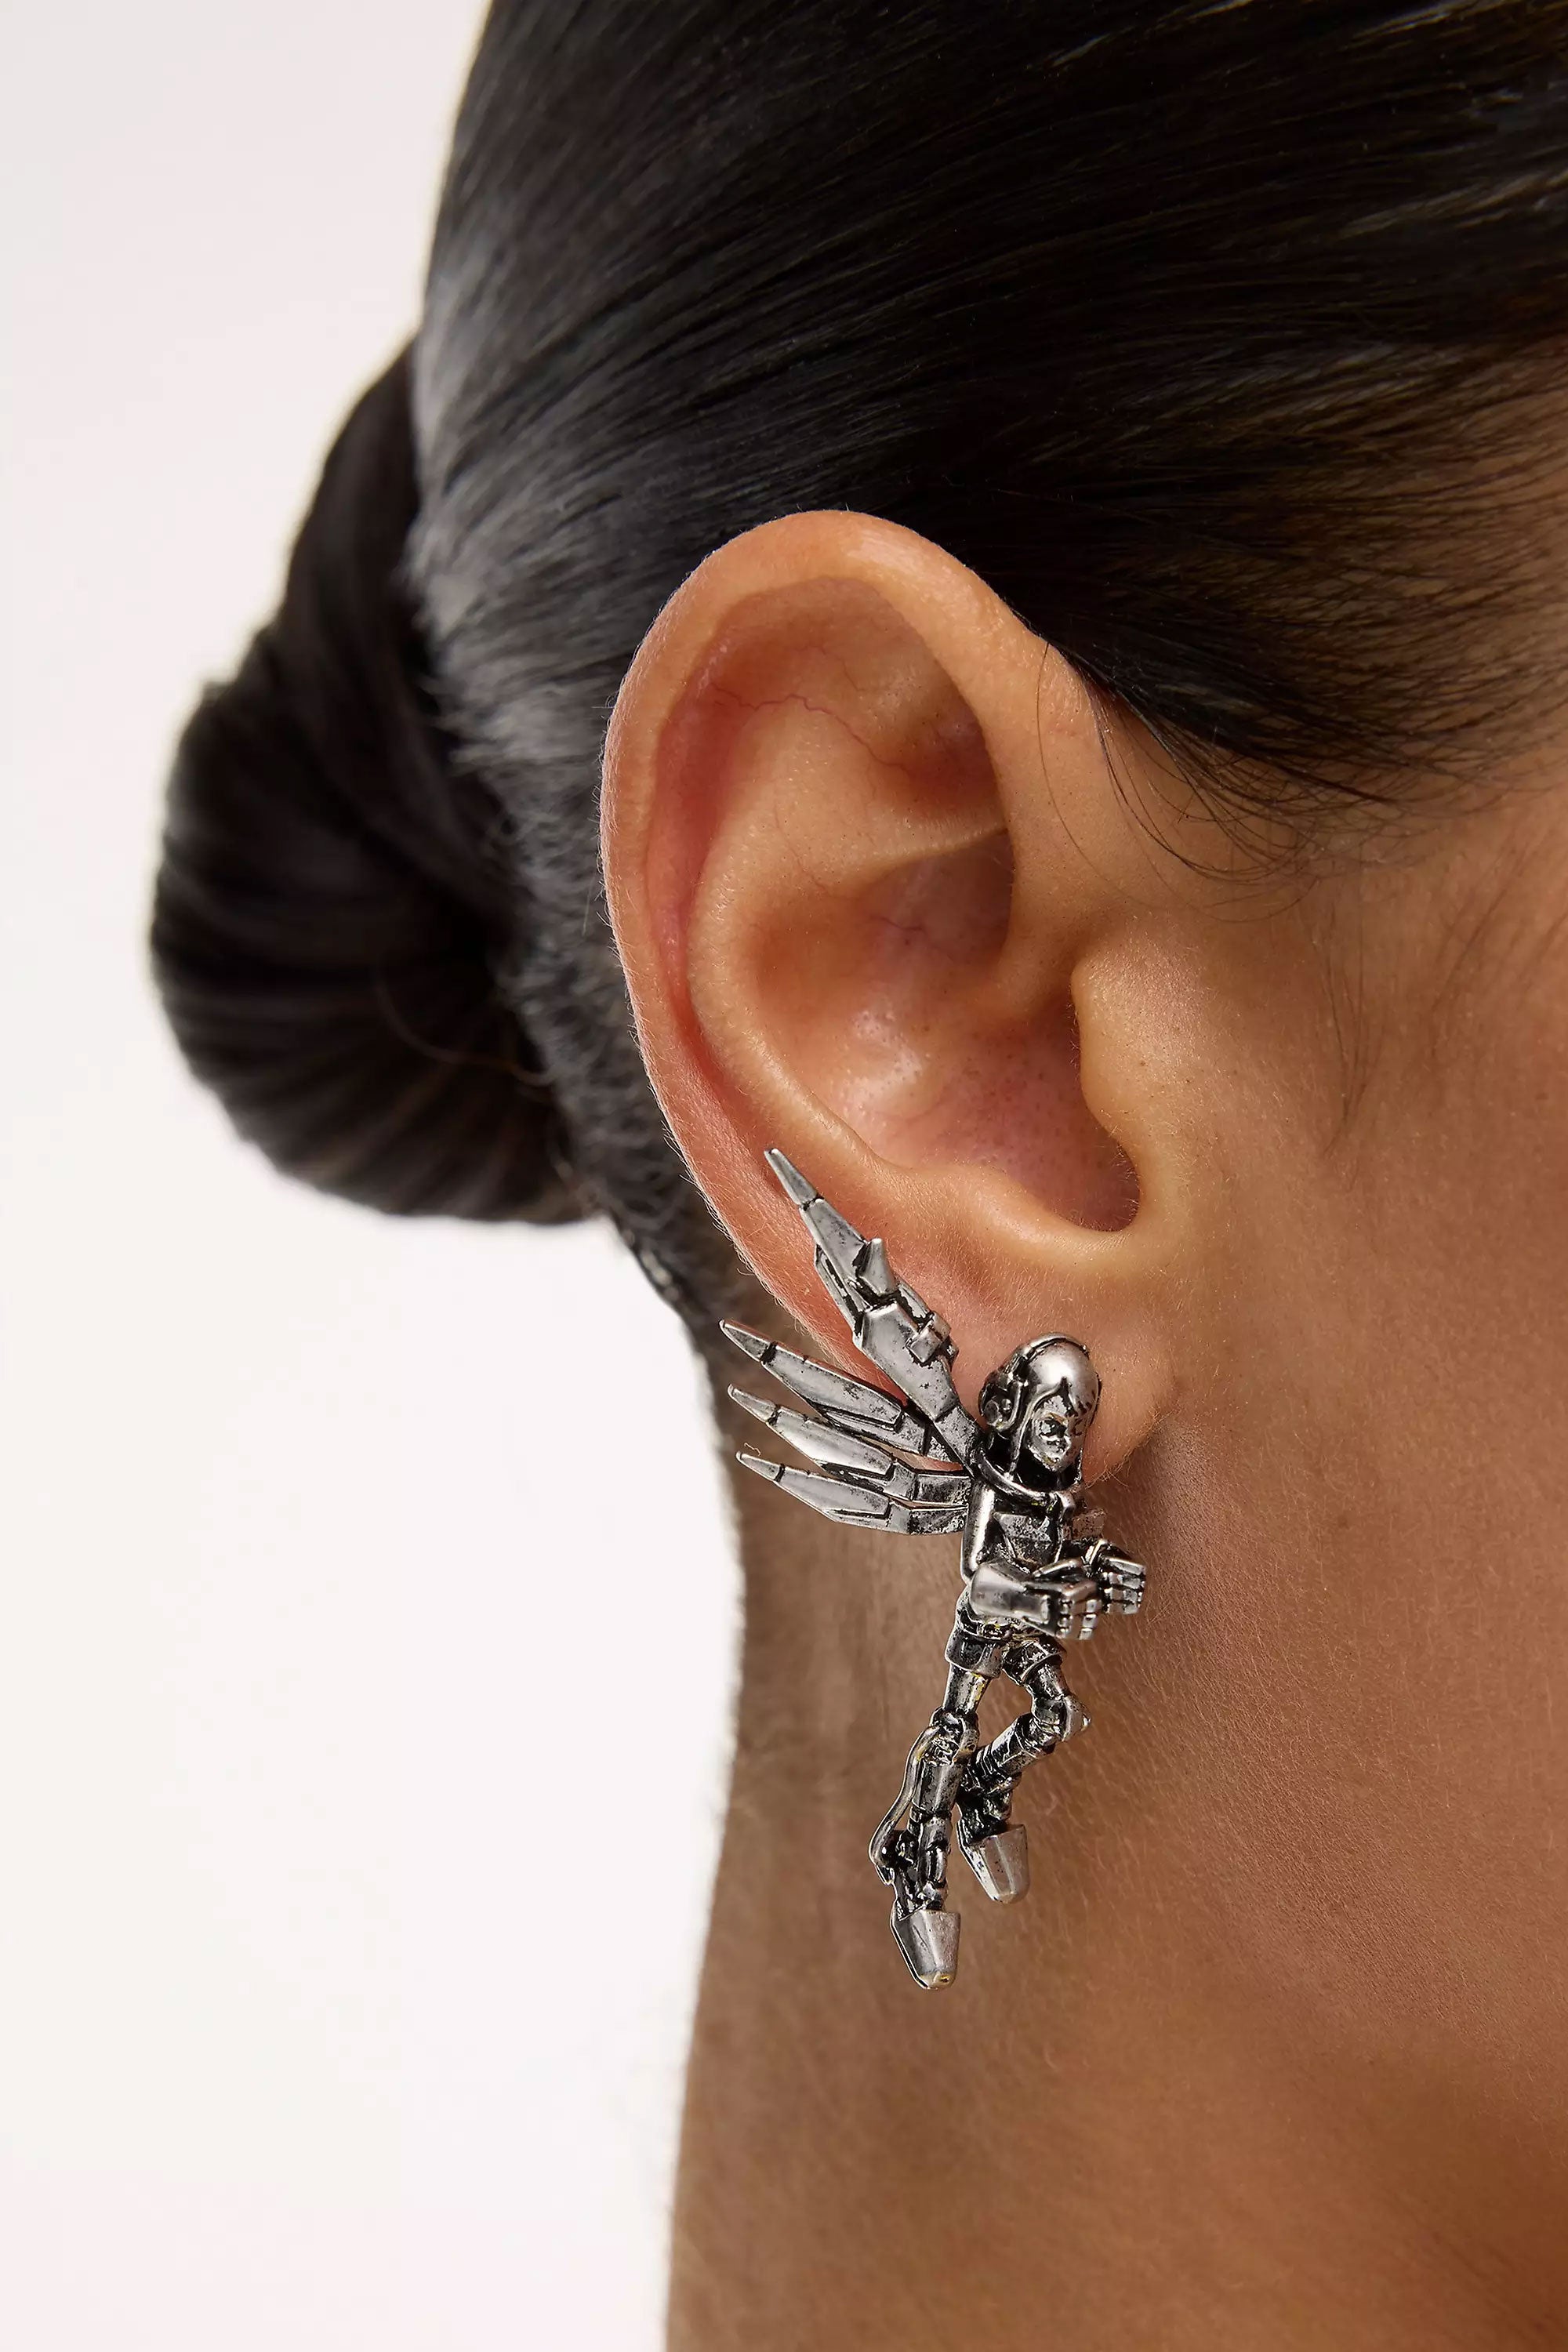 The HEAVEN - ROBOT EARRINGS  available online with global shipping, and in PAM Stores Melbourne and Sydney.